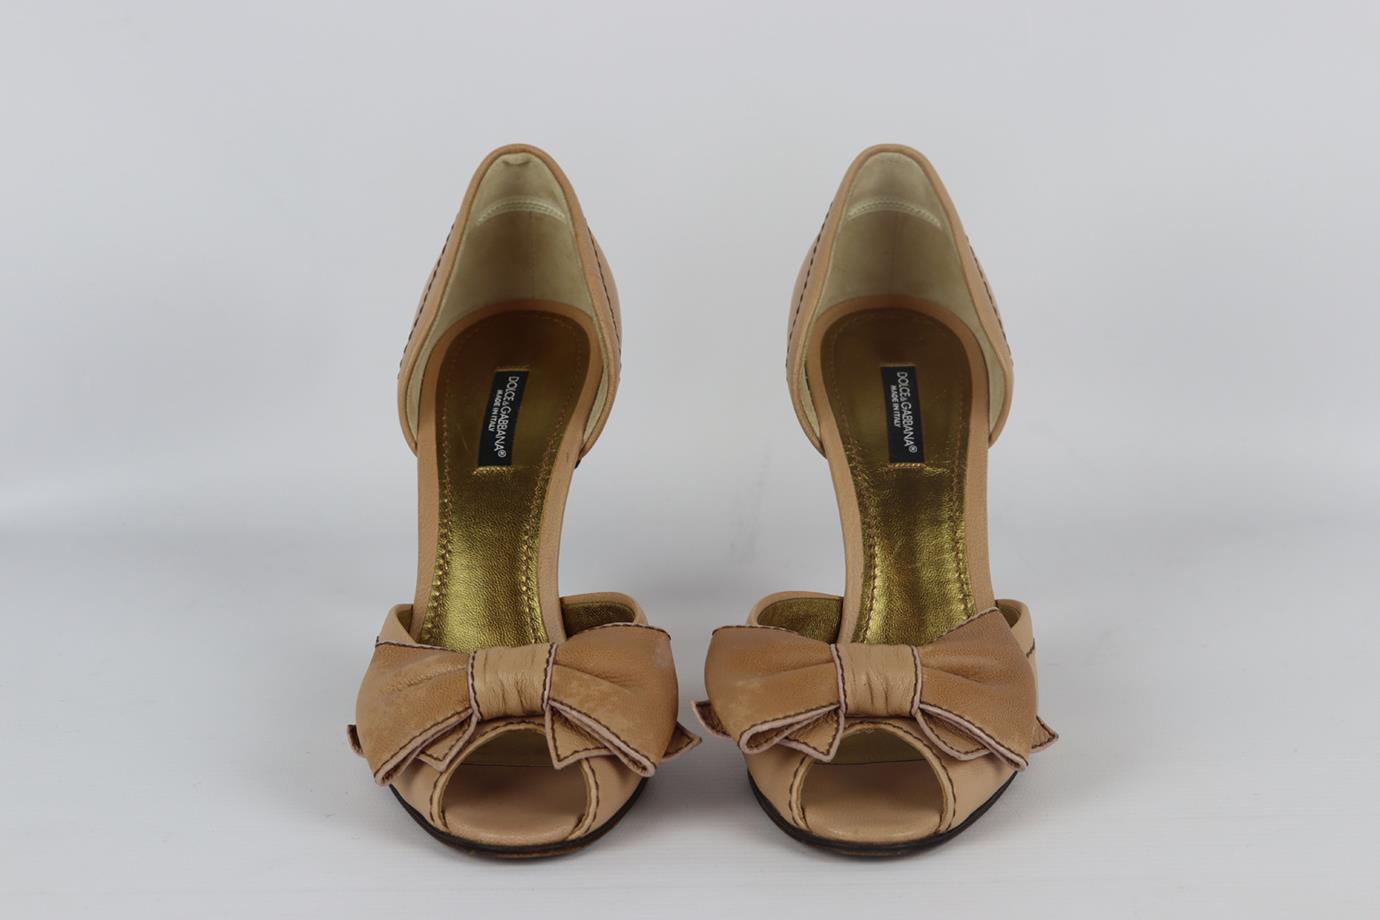 DOLCE AND GABBANA BOW DETAILED LEATHER PUMPS EU 38.5 UK 5.5 US 8.5